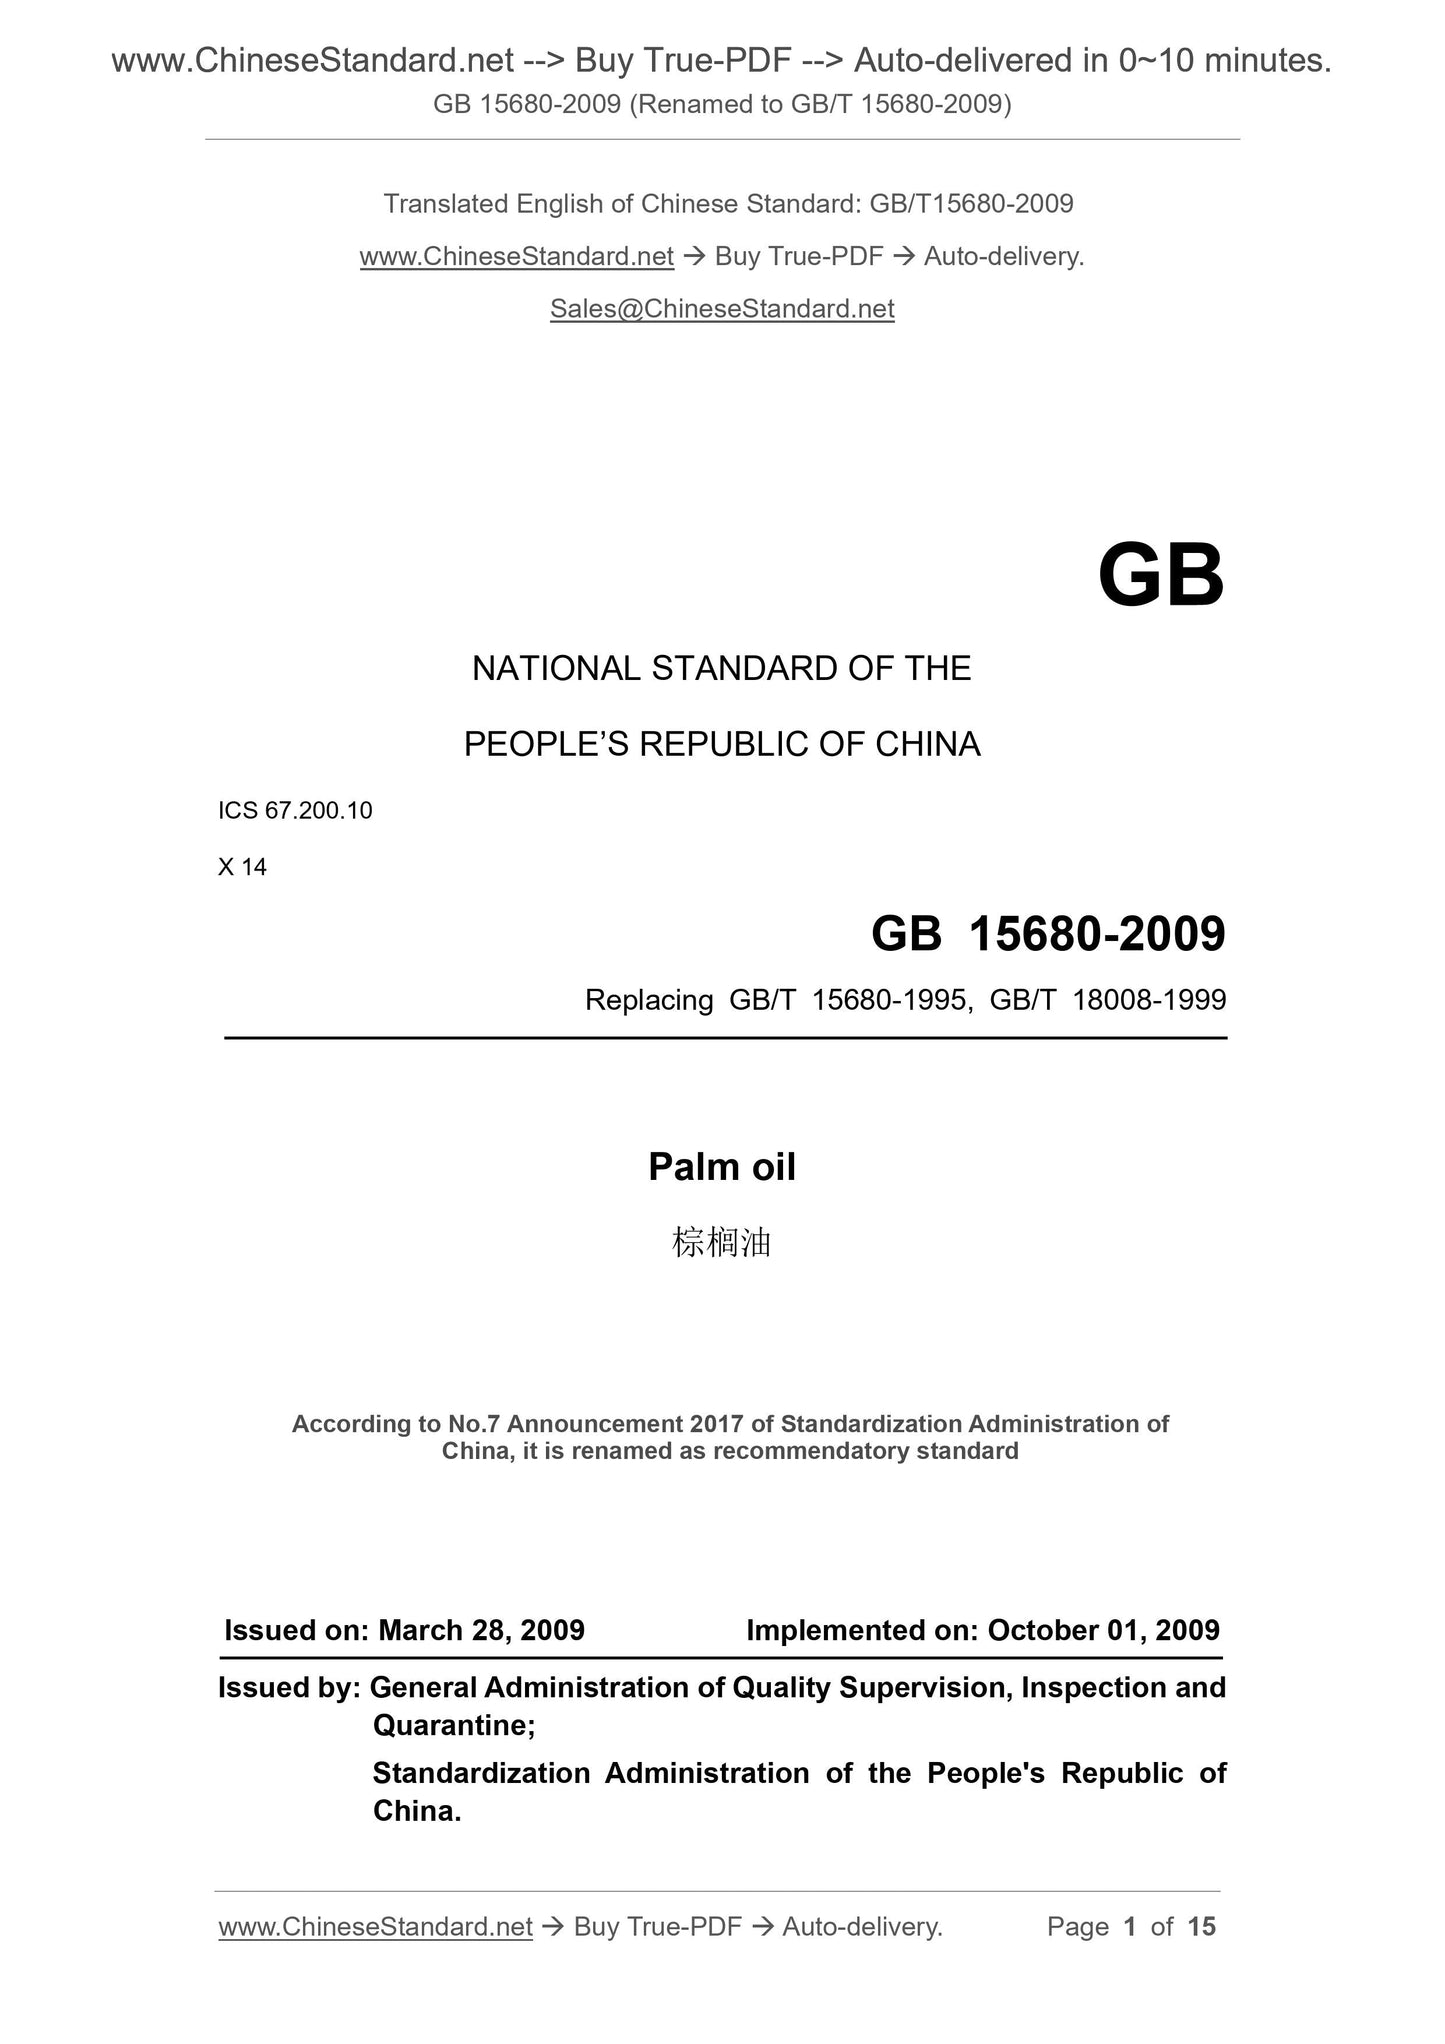 GB 15680-2009 Page 1